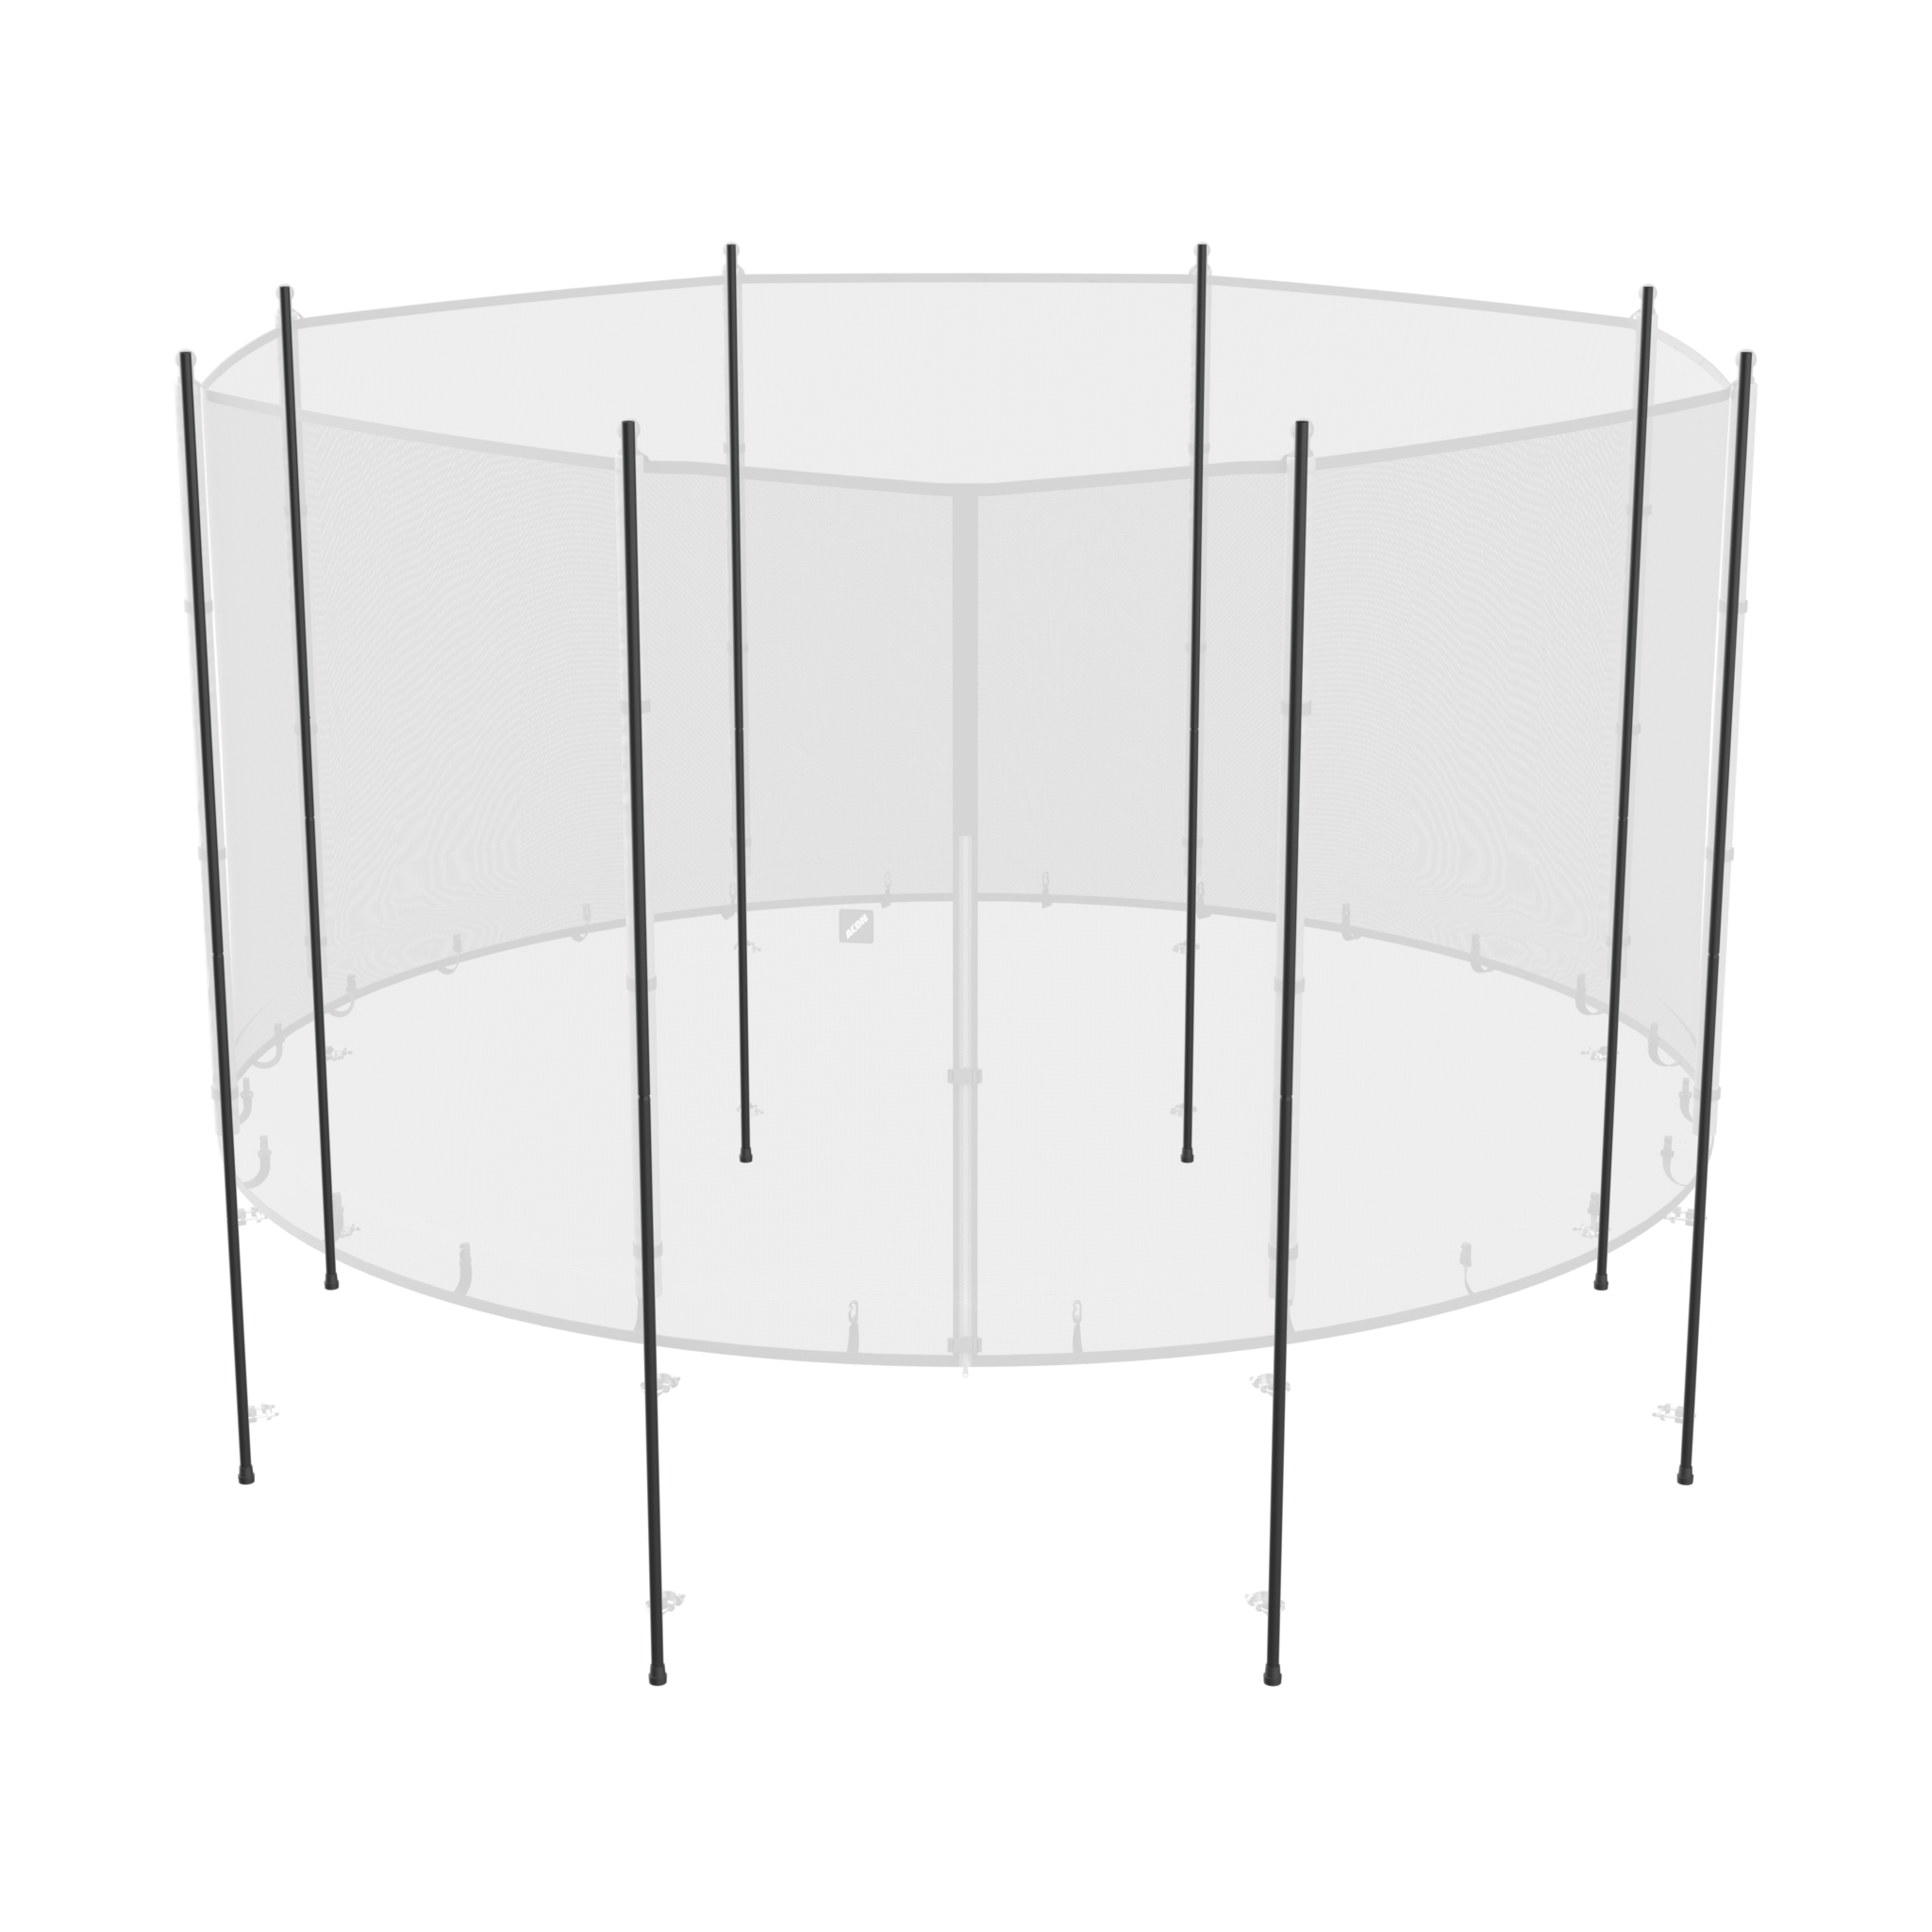 Picture that highlights the Enclosure poles in ACON Standard enclosure